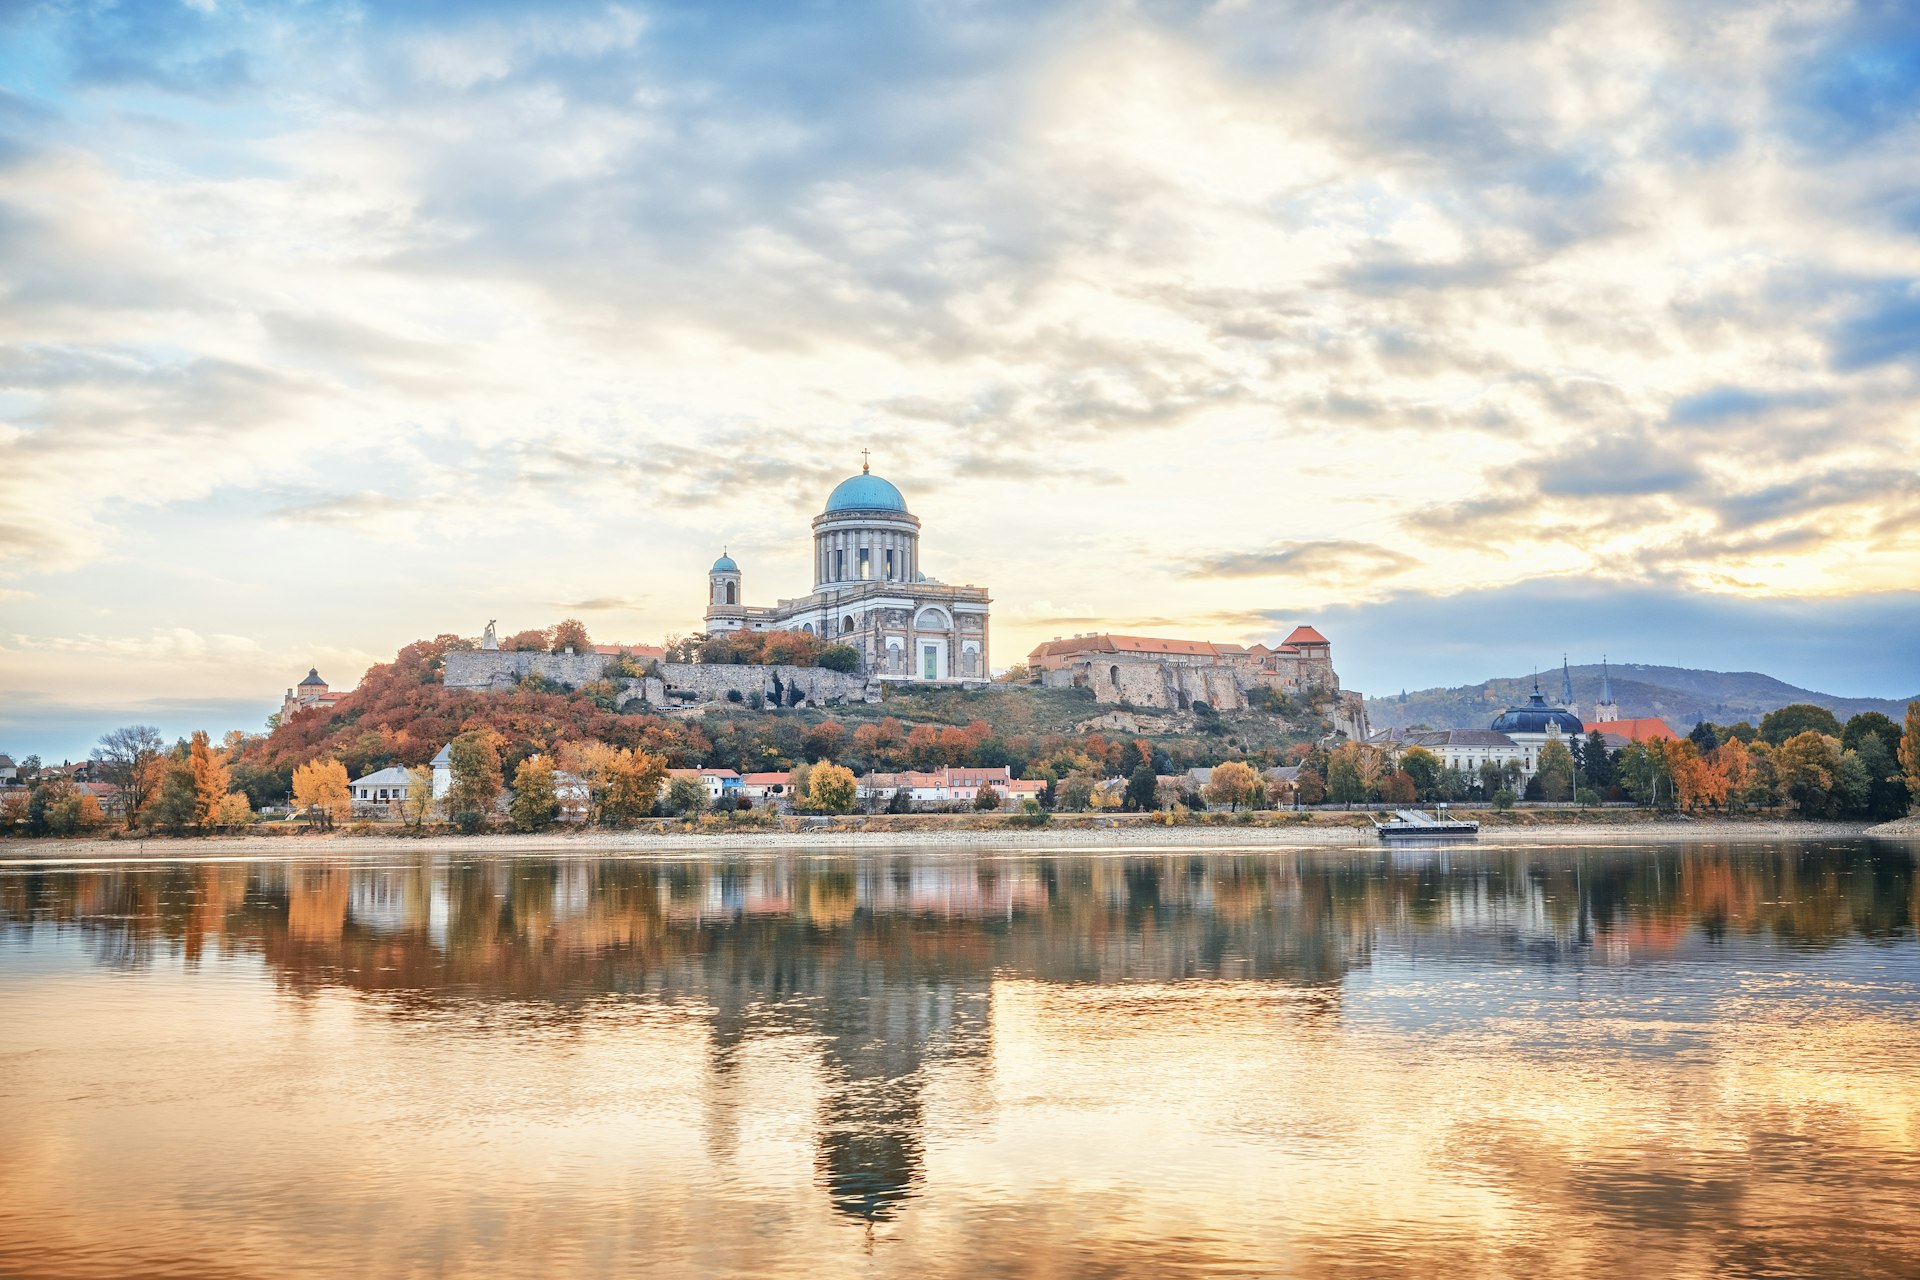 Basilica of the Blessed Virgin Mary rising above the Danube in Hungary